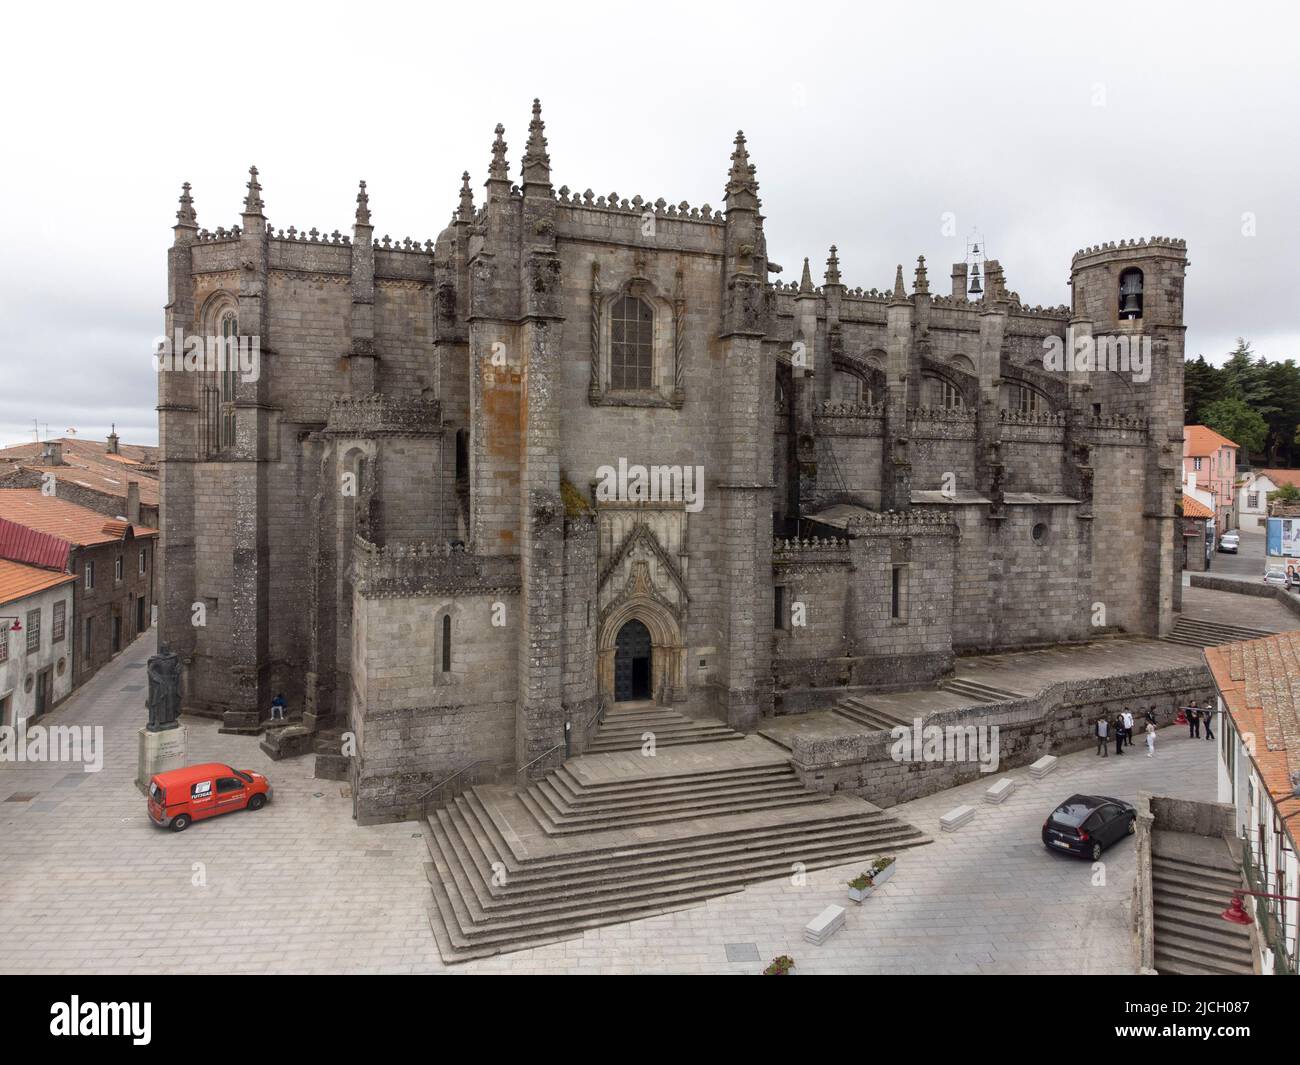 Aerial view of the Cathedral of Guarda - Sé Catedral da Guarda, Portugal, Europe Stock Photo